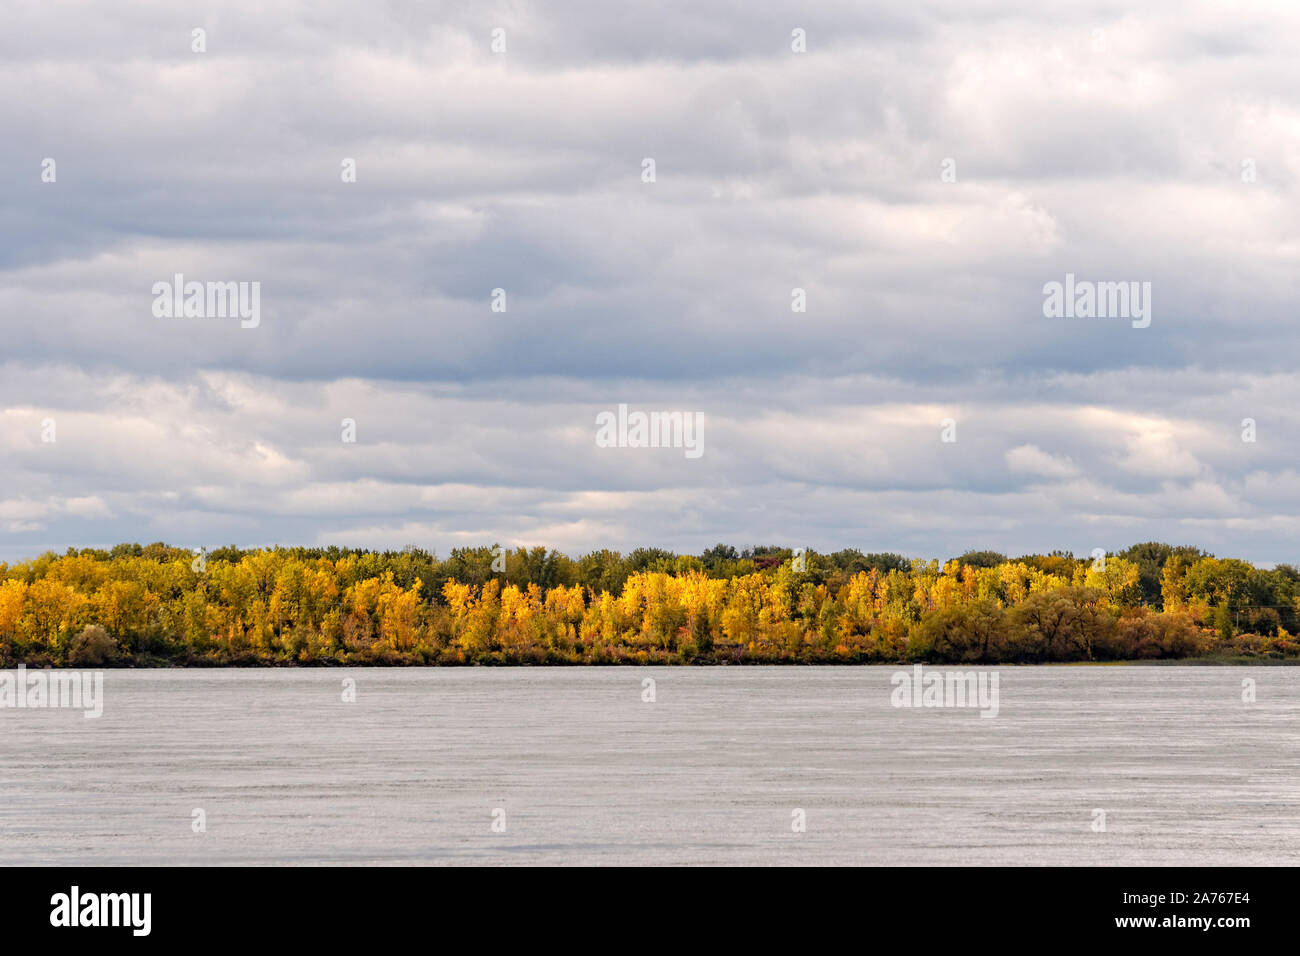 View of the Saint Lawrence River and colorful fall foliage on the south shore, Lasalle, Montreal, Quebec, Canada Stock Photo